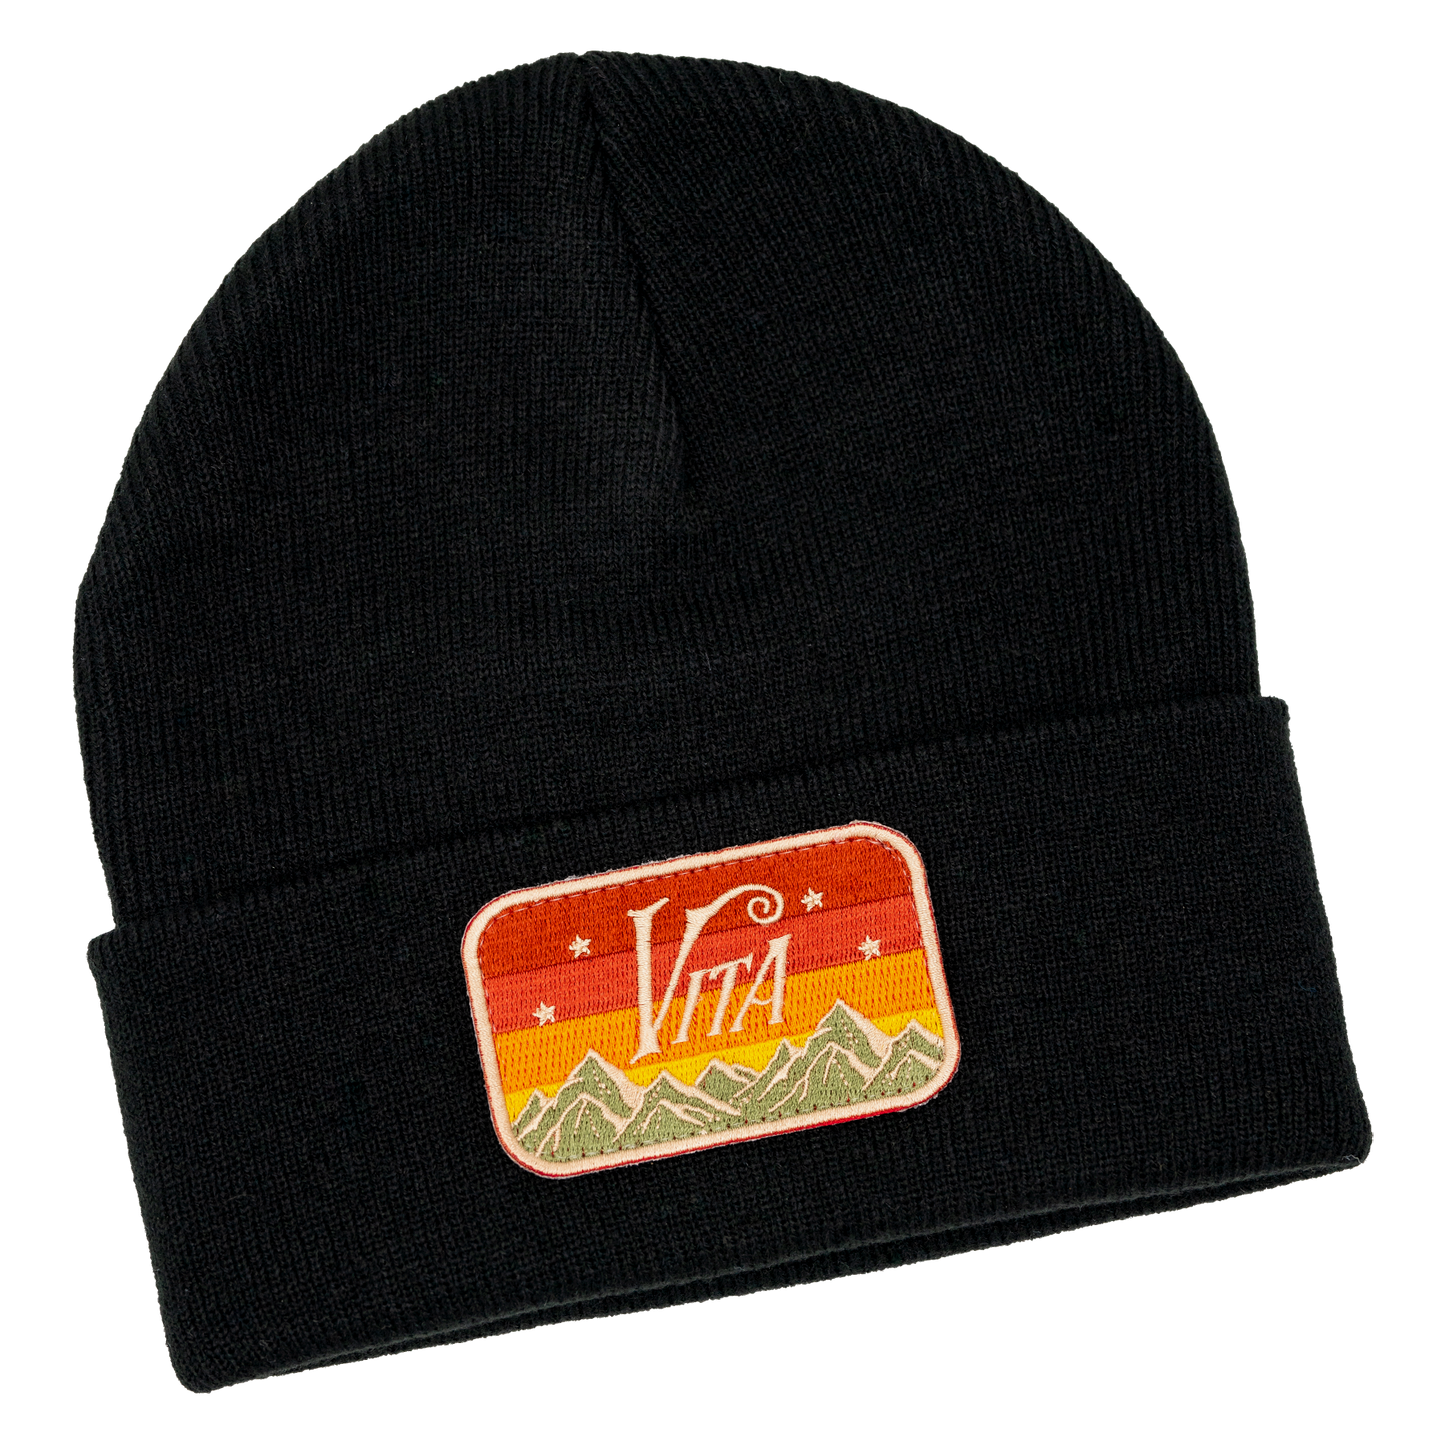 Product Image: black beanie with Vitalogy patch.